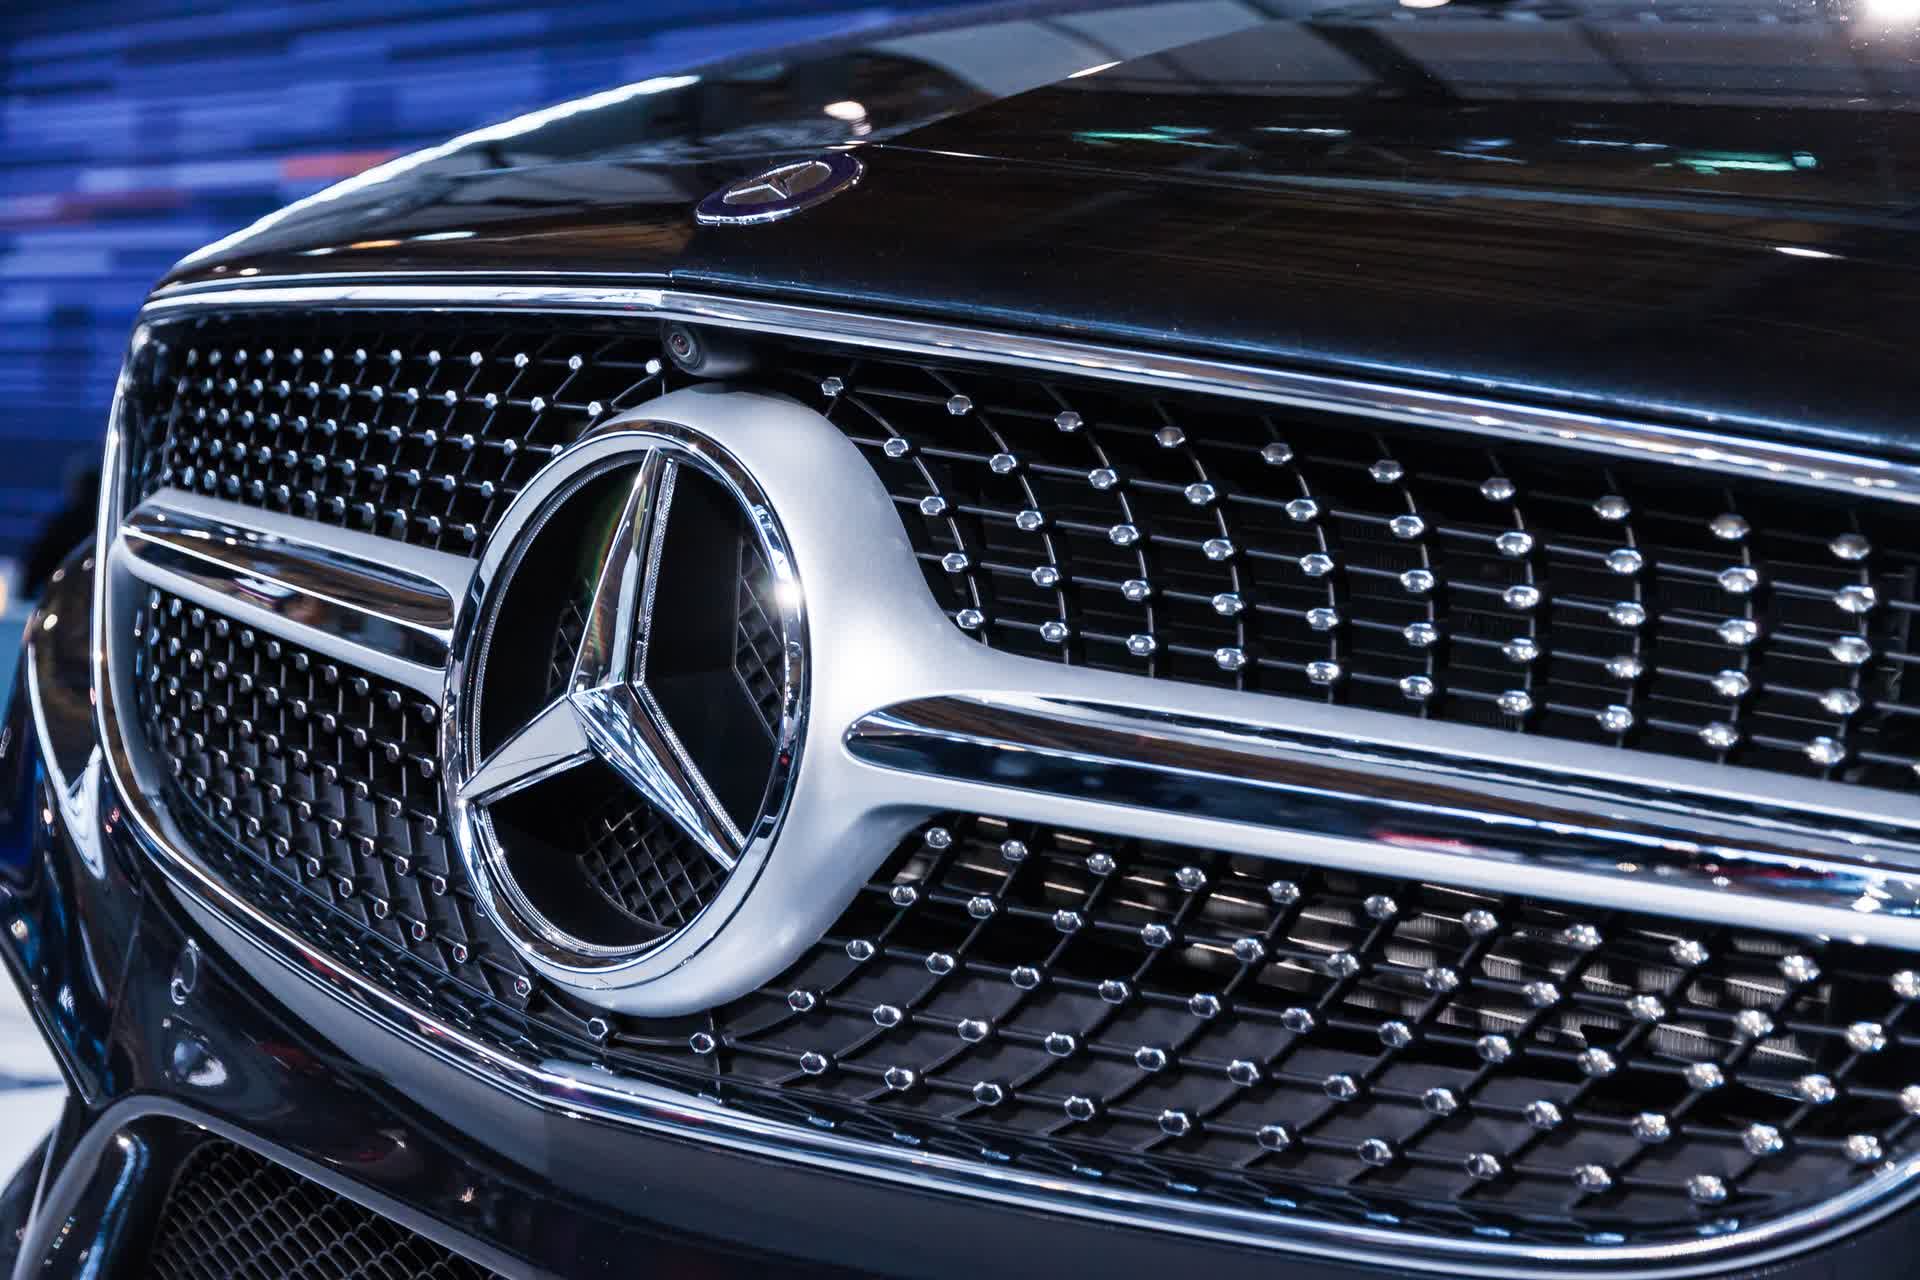 Mercedes issues do not drive recall for almost 300,000 SUVs over potential brake failure